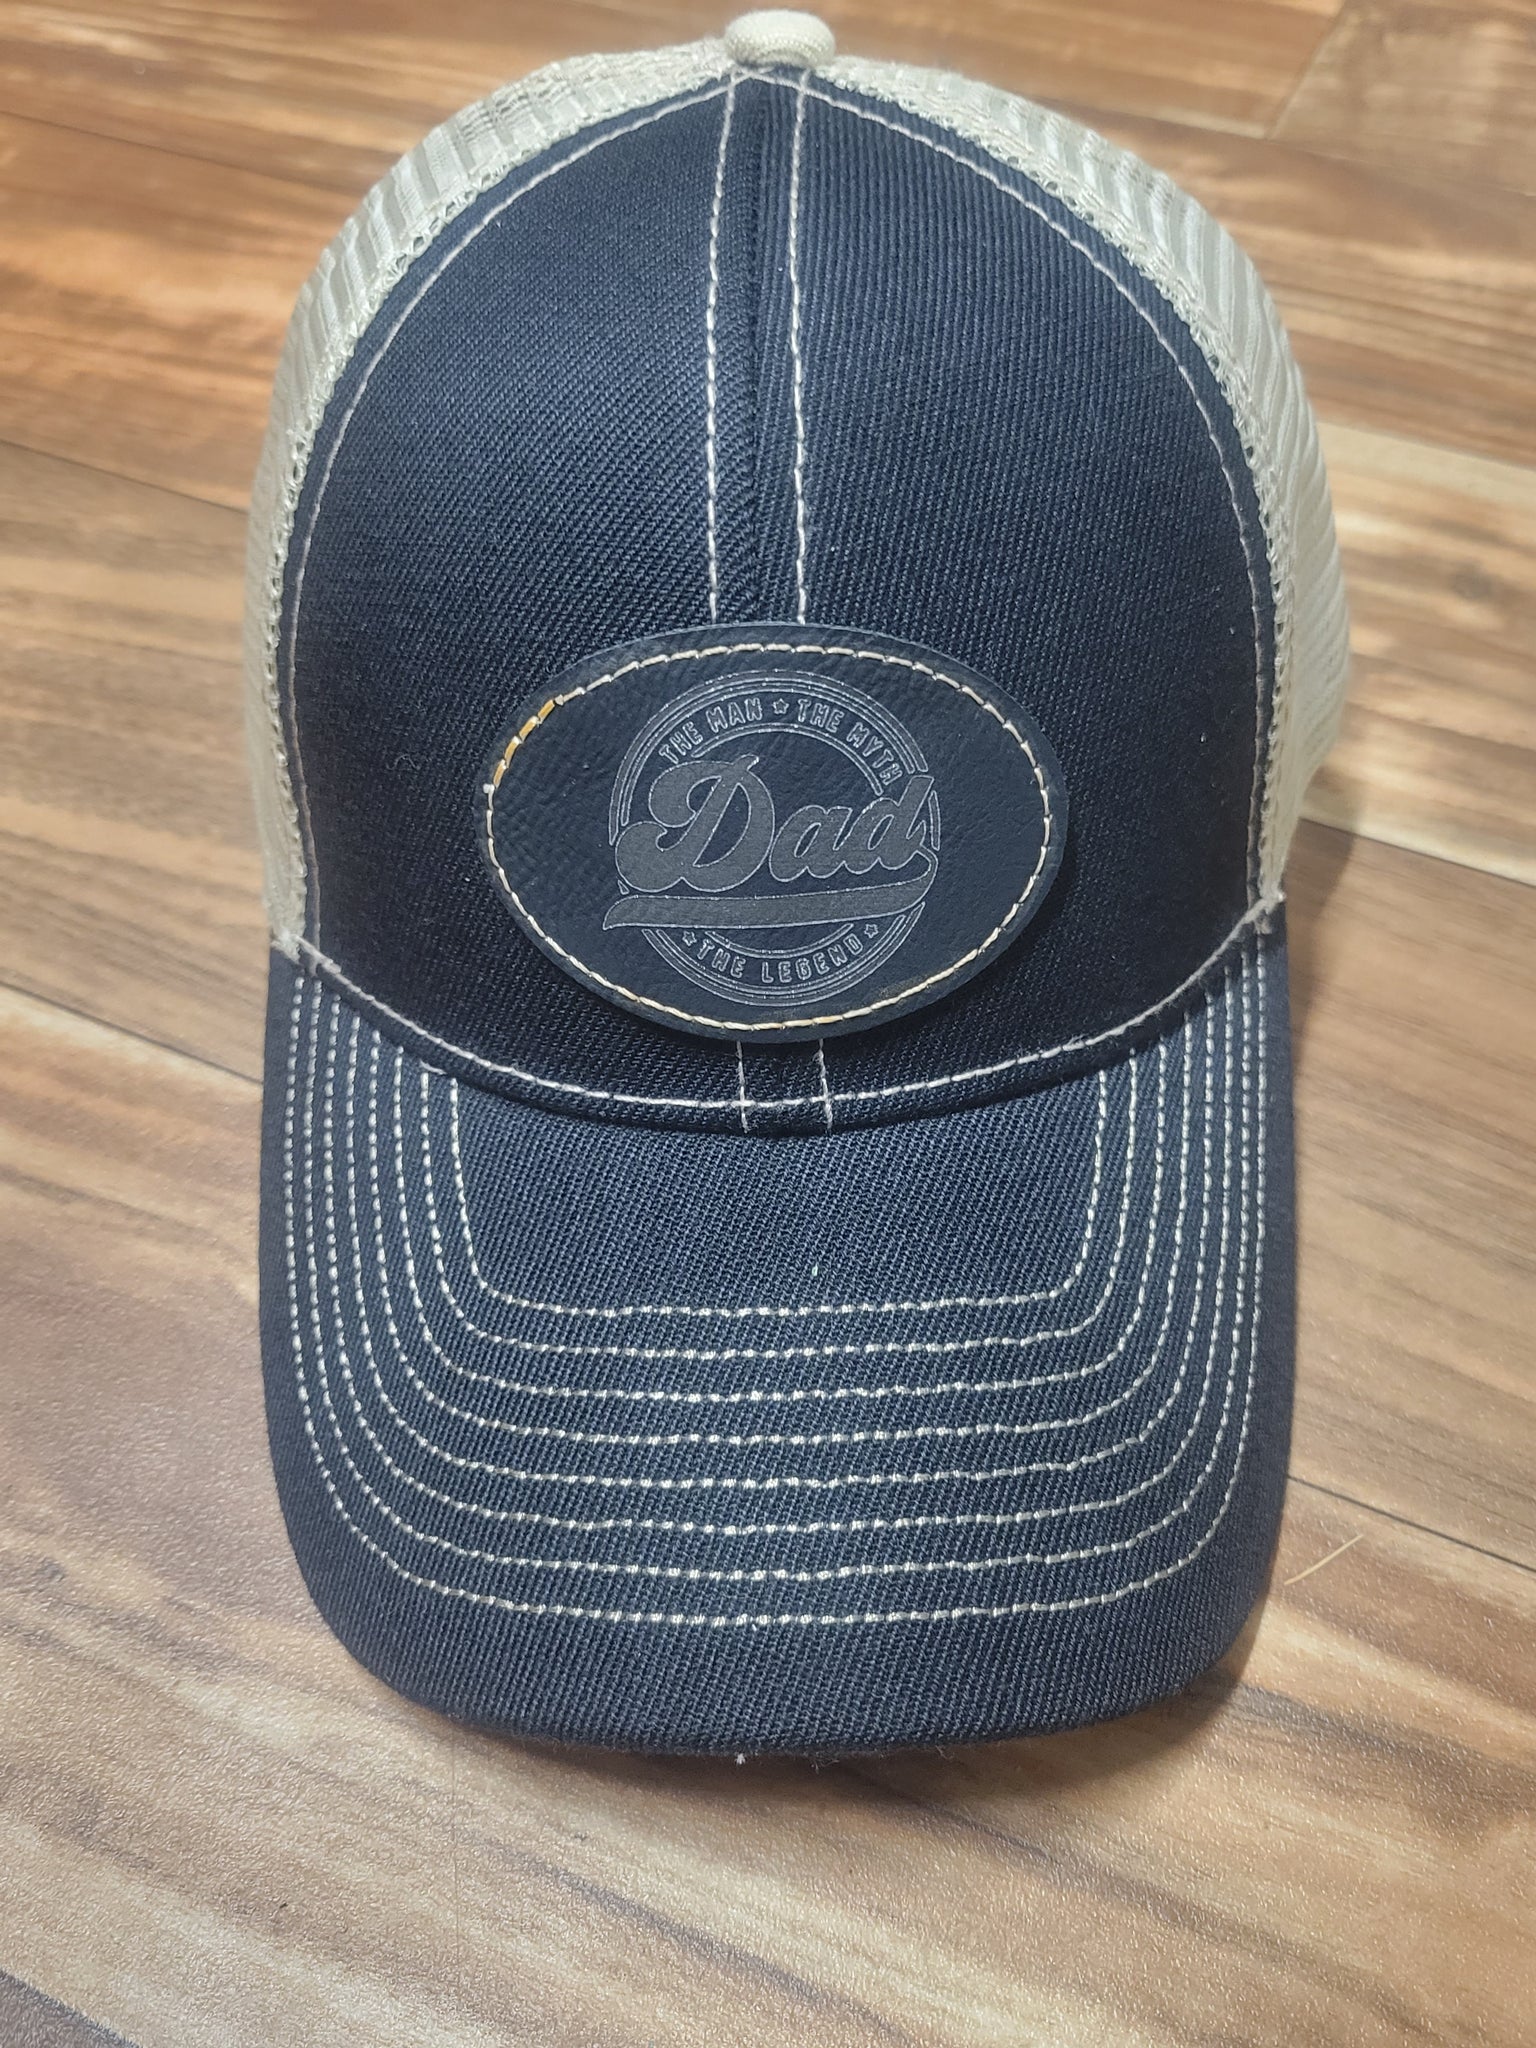 DAD (The Man, The Myth, The Legend) - Black Leather Patch Hat